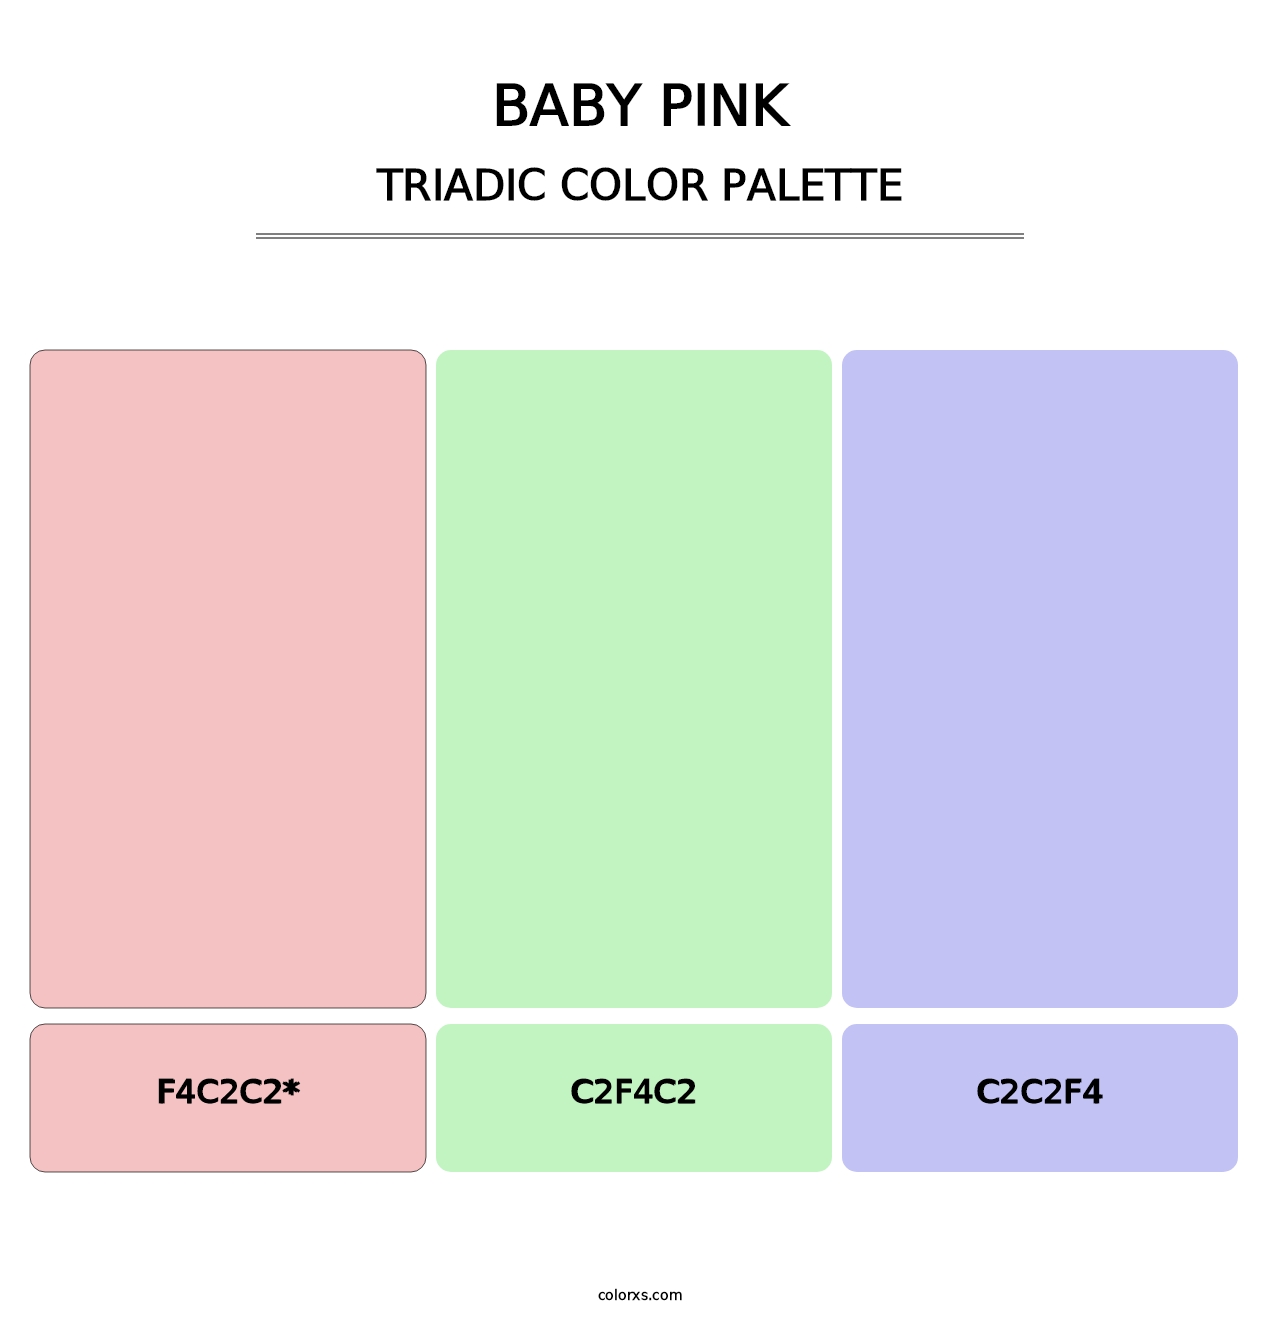 Baby Pink - Triadic Color Palette